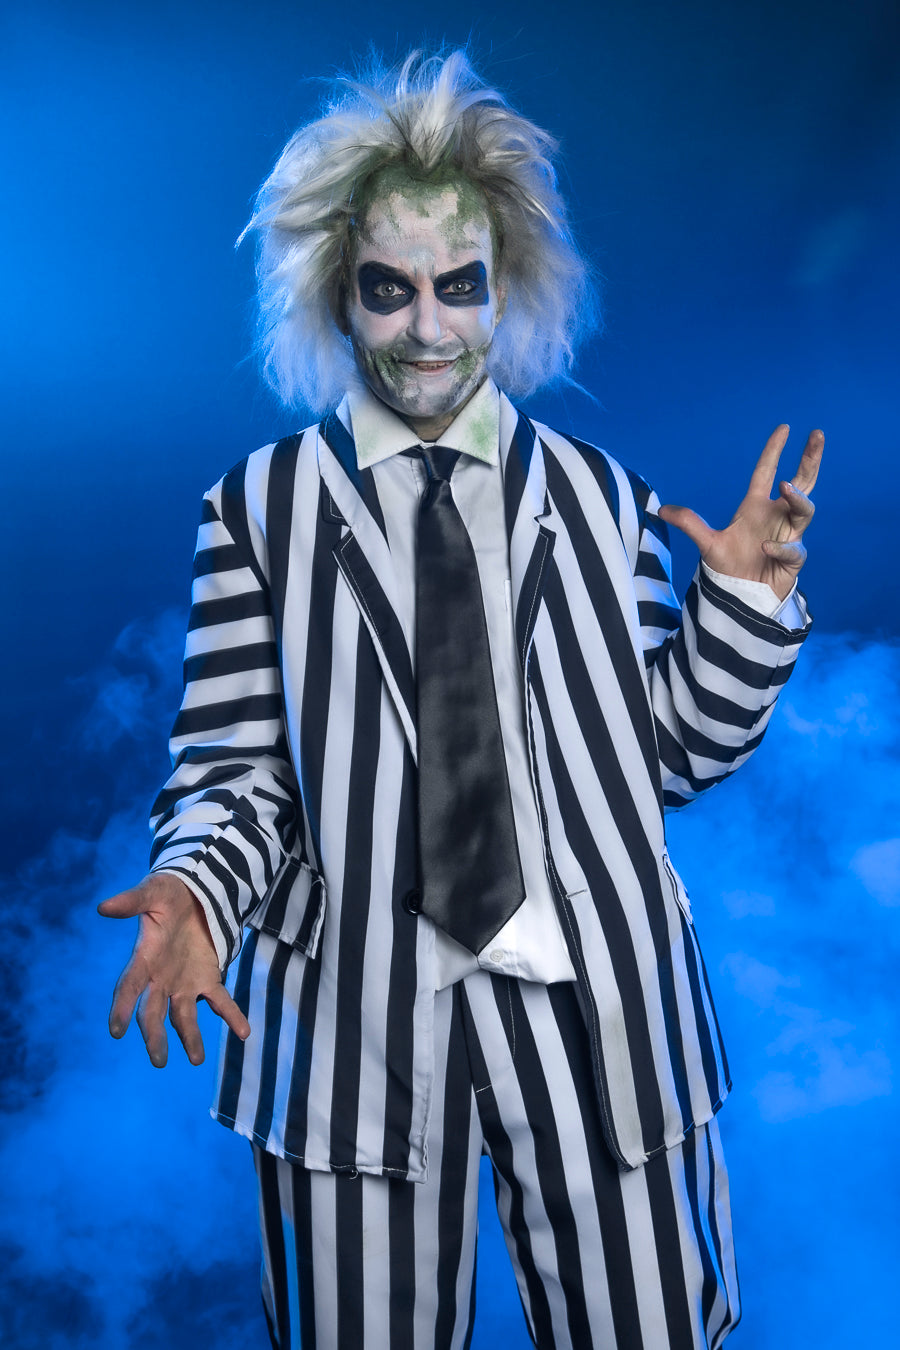 Beetlejuice inspired by the Tim Burton Classic, Costume Hire or Cosplay, plus Makeup and Photography. Proudly by and available at, Little Shop of Horrors Costumery 6/1 Watt Rd Mornington & Melbourne.